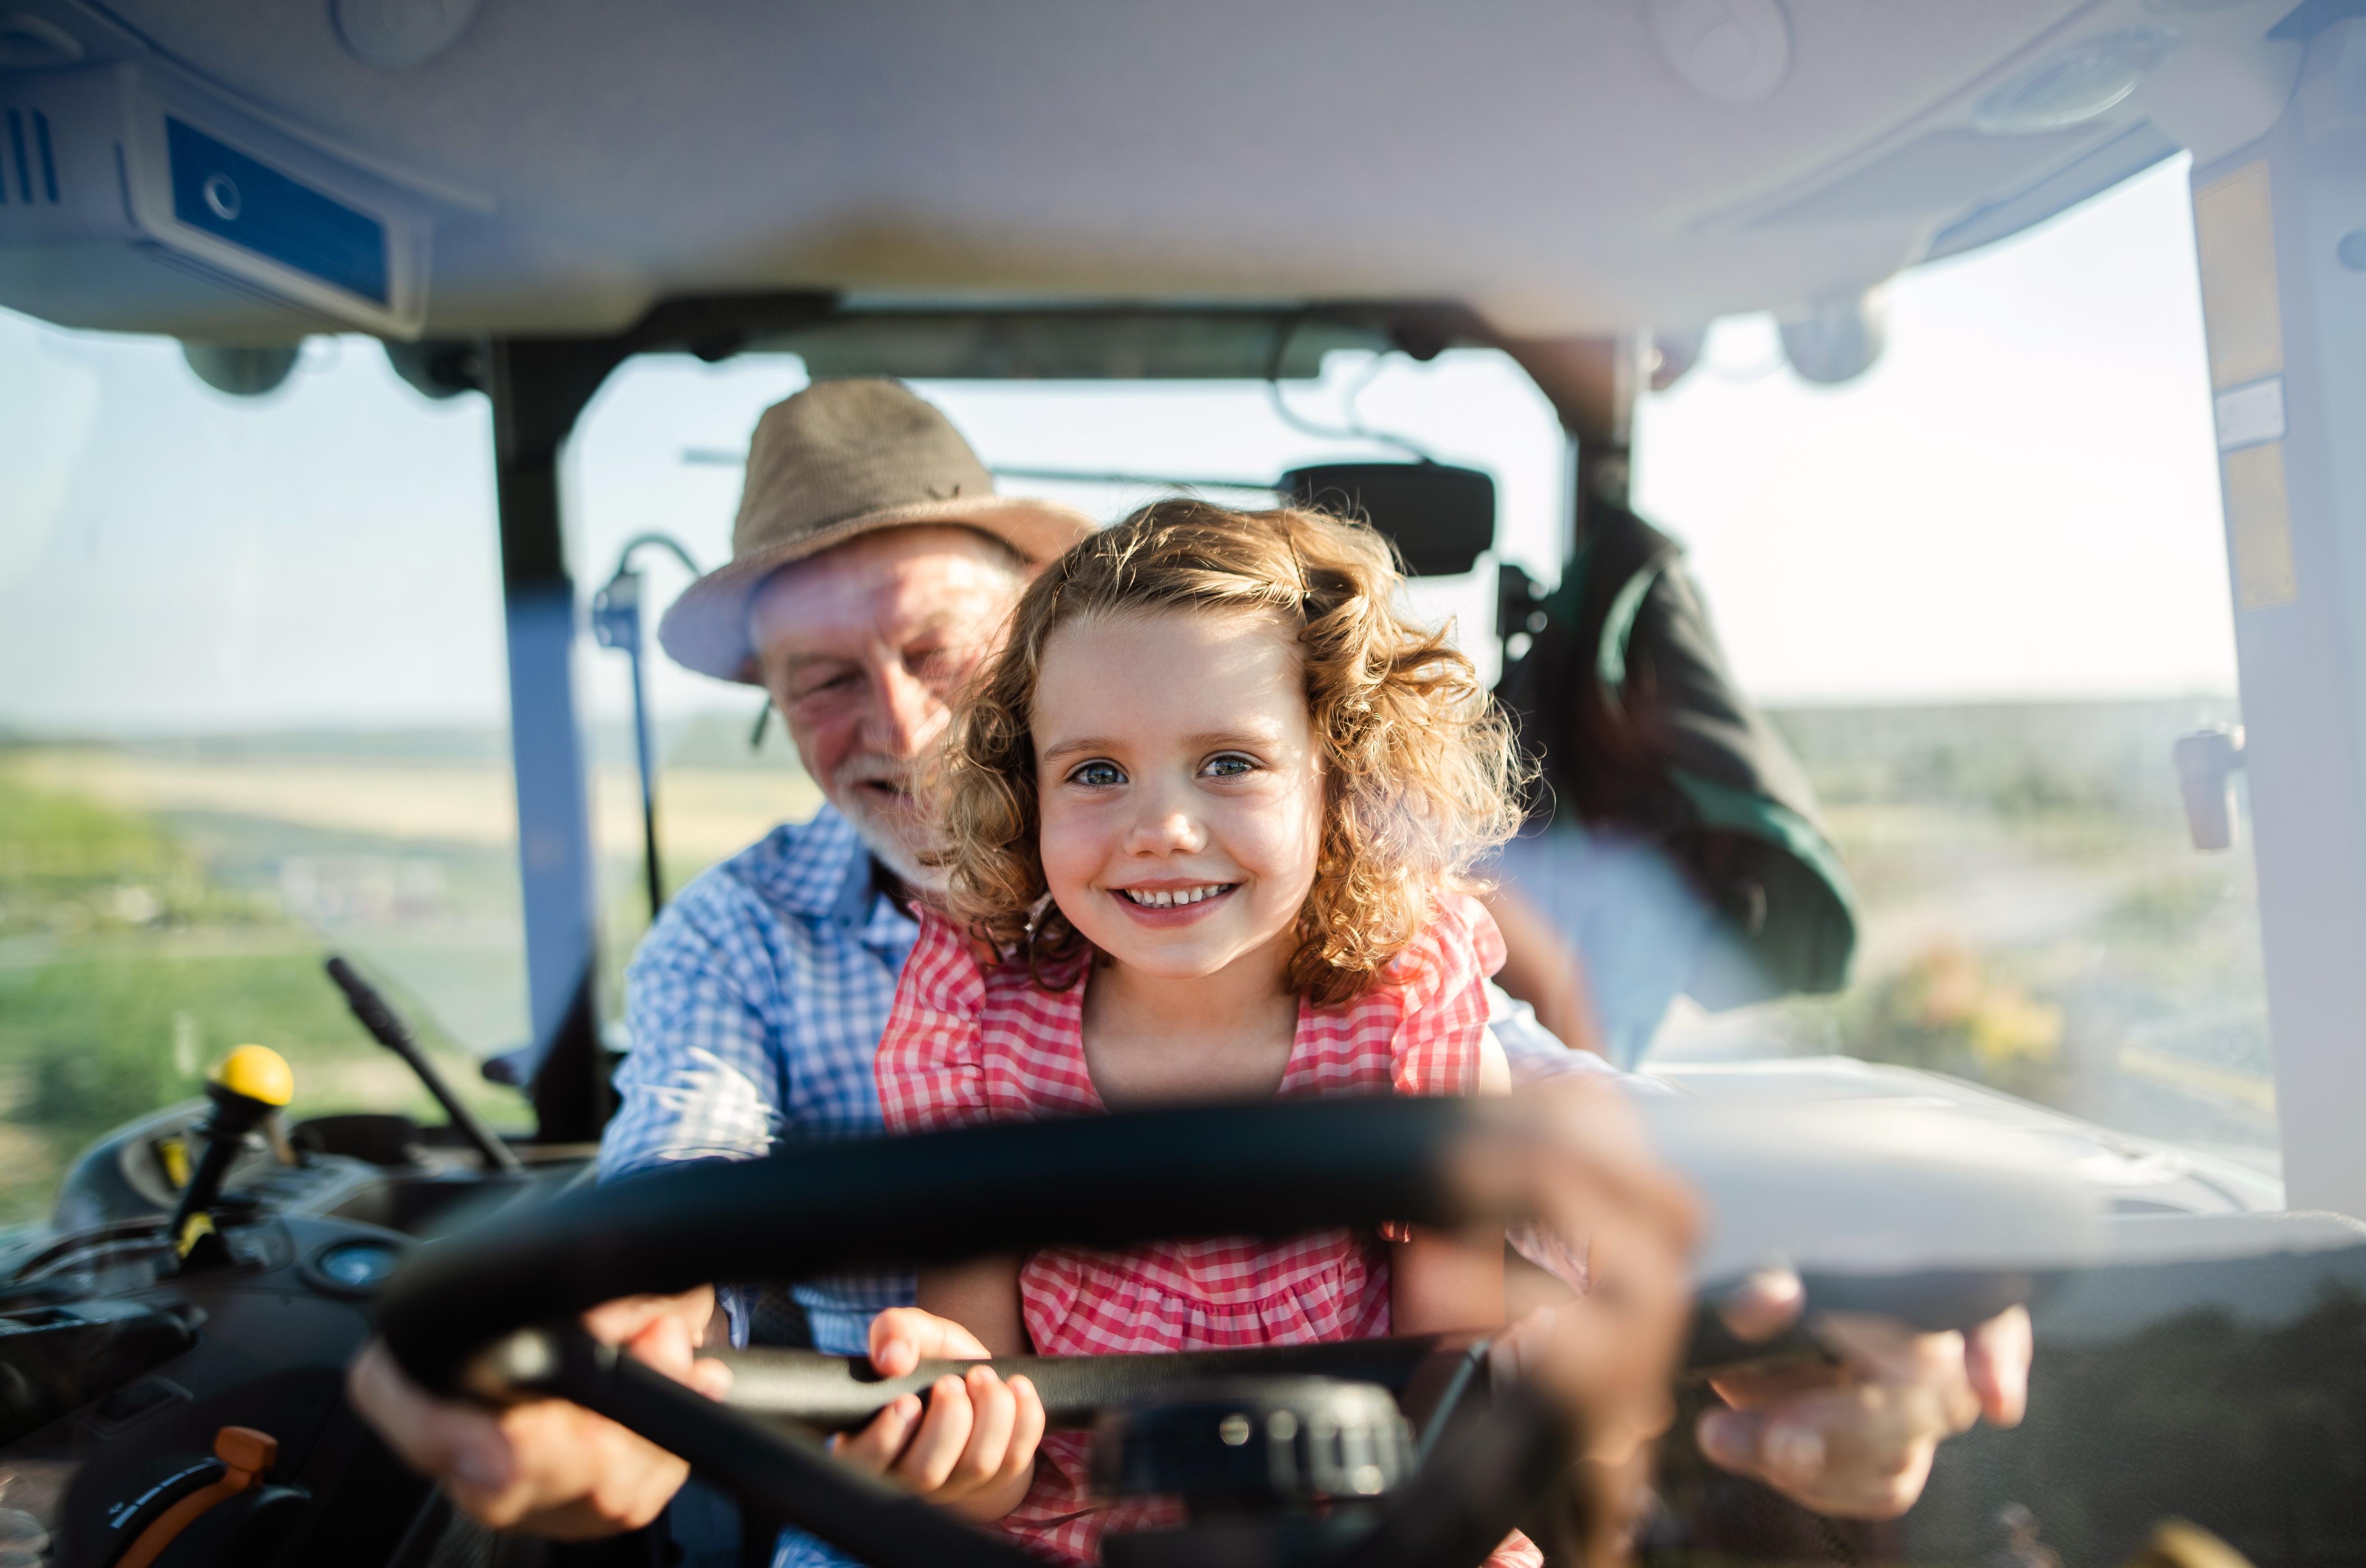 Image of Senior and Child on Tractor Smiling